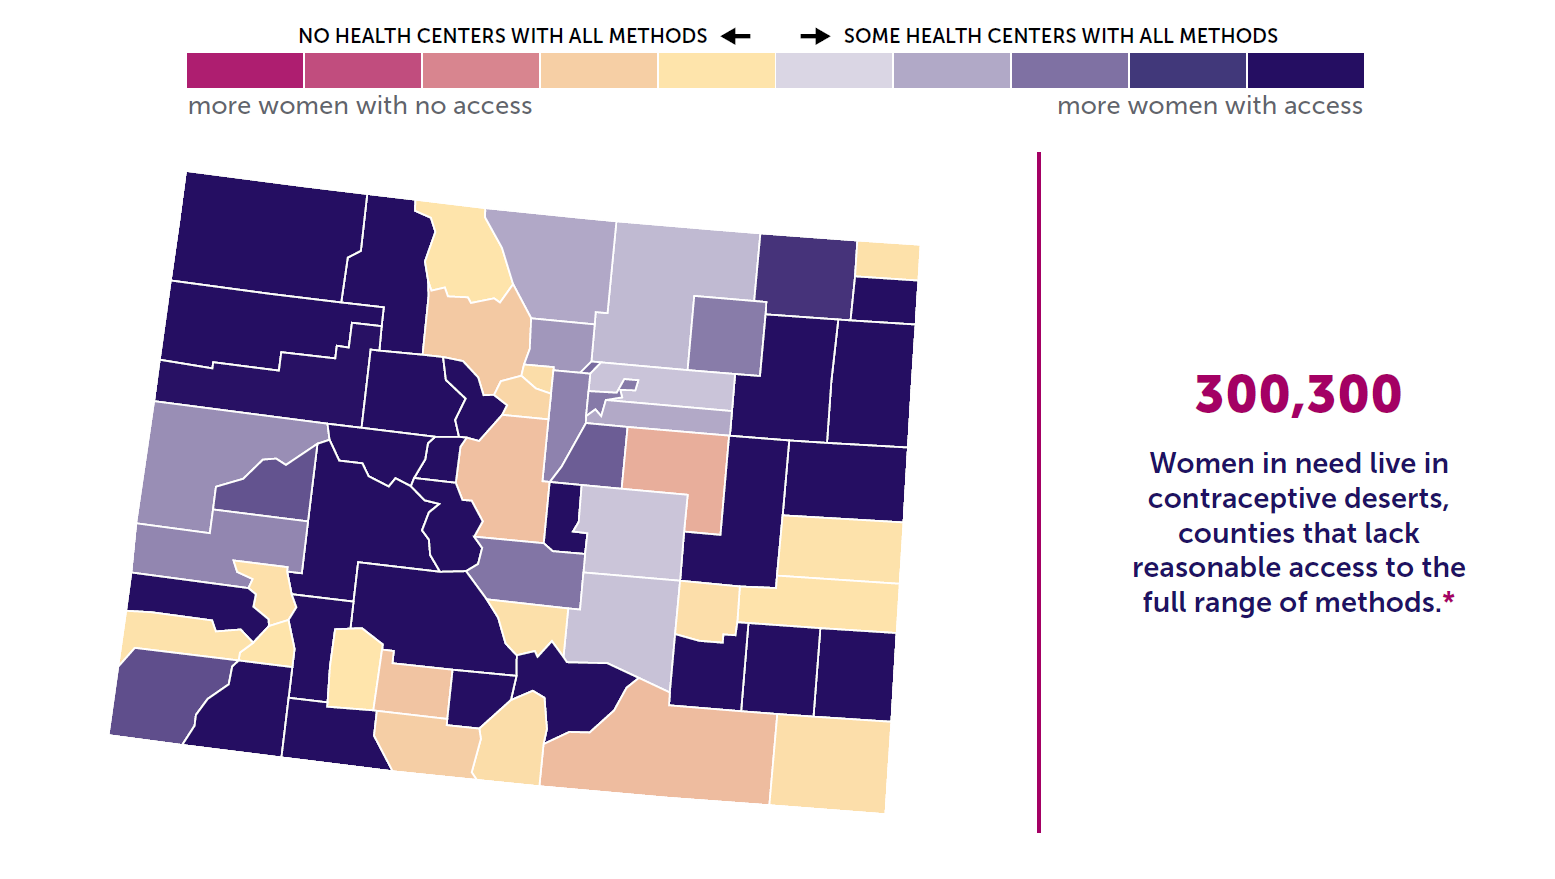 A map of Colorado showing the levels of contraceptive access by county. 